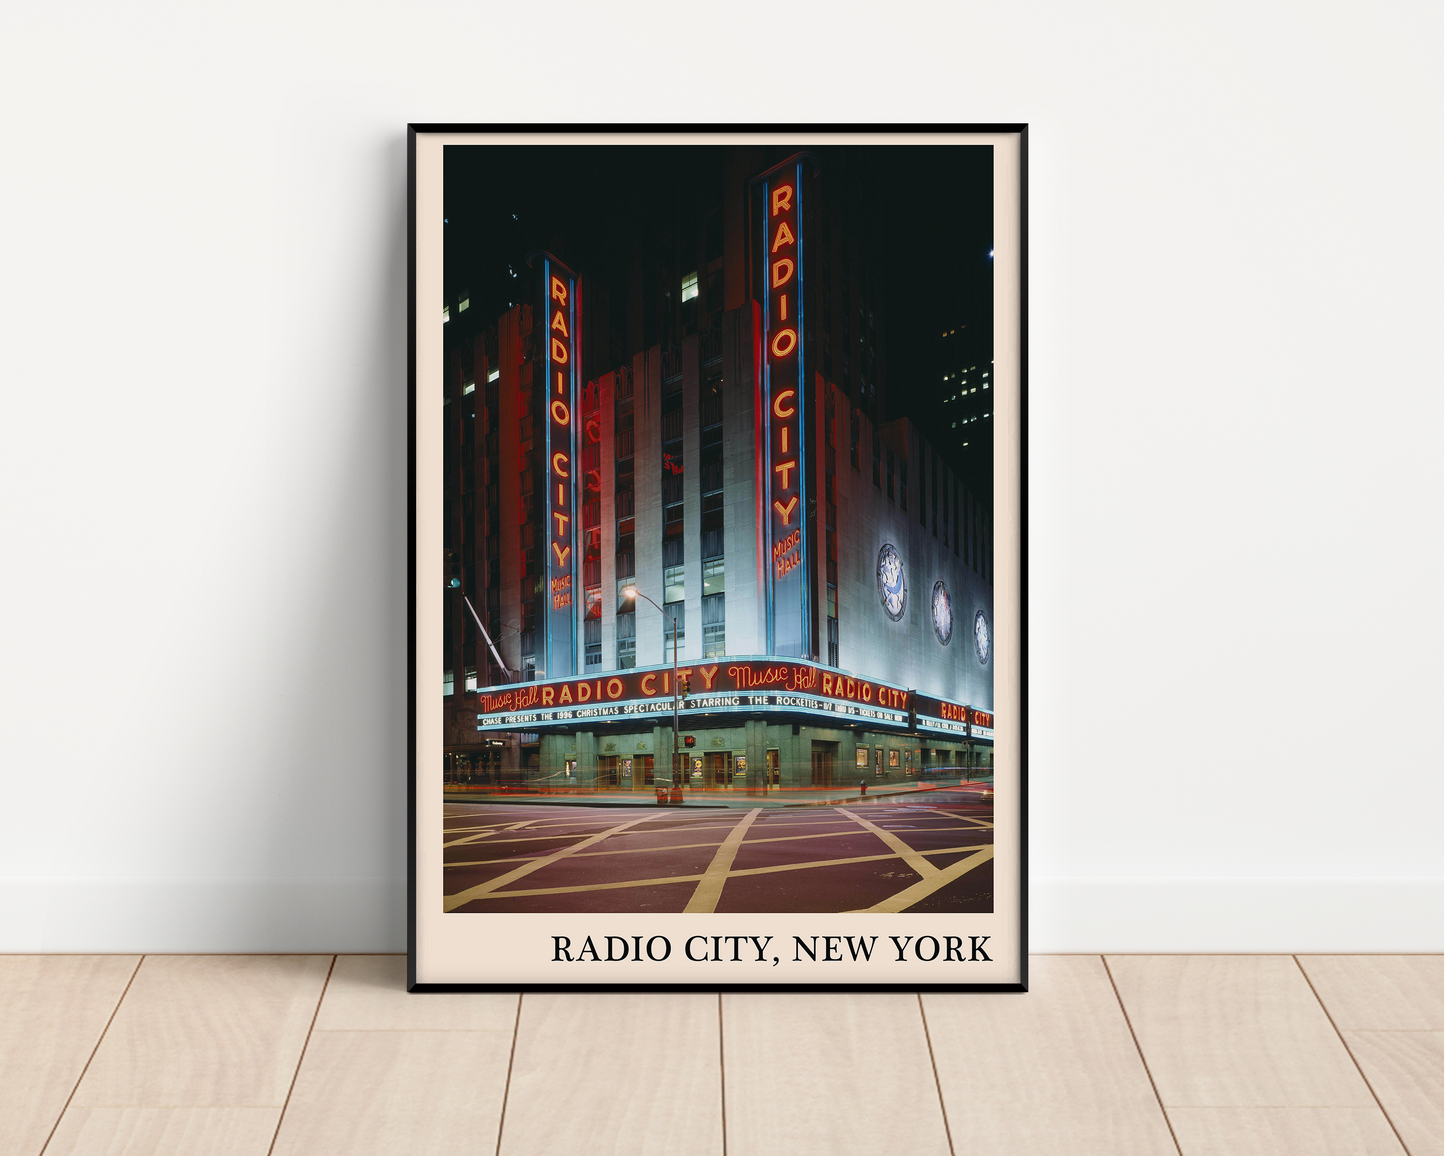 Iconic photo of Radio City in New York captured in a retro black framed jazz poster, leaning against a white wall